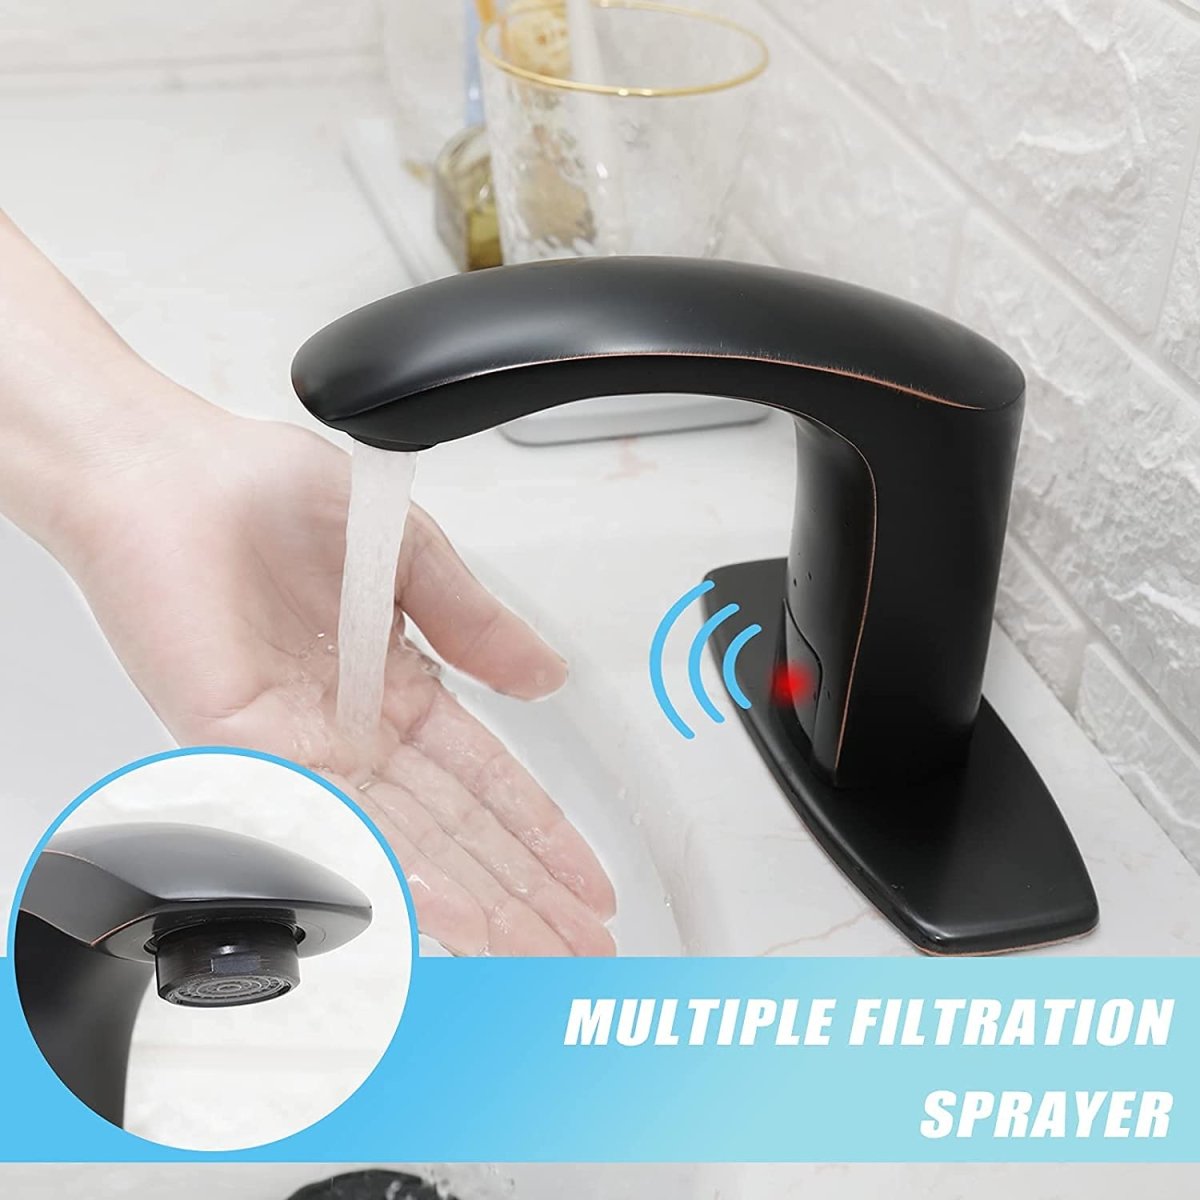 Touchless Bathroom Faucet With Drain Oil Rubbed Bronze - buyfaucet.com